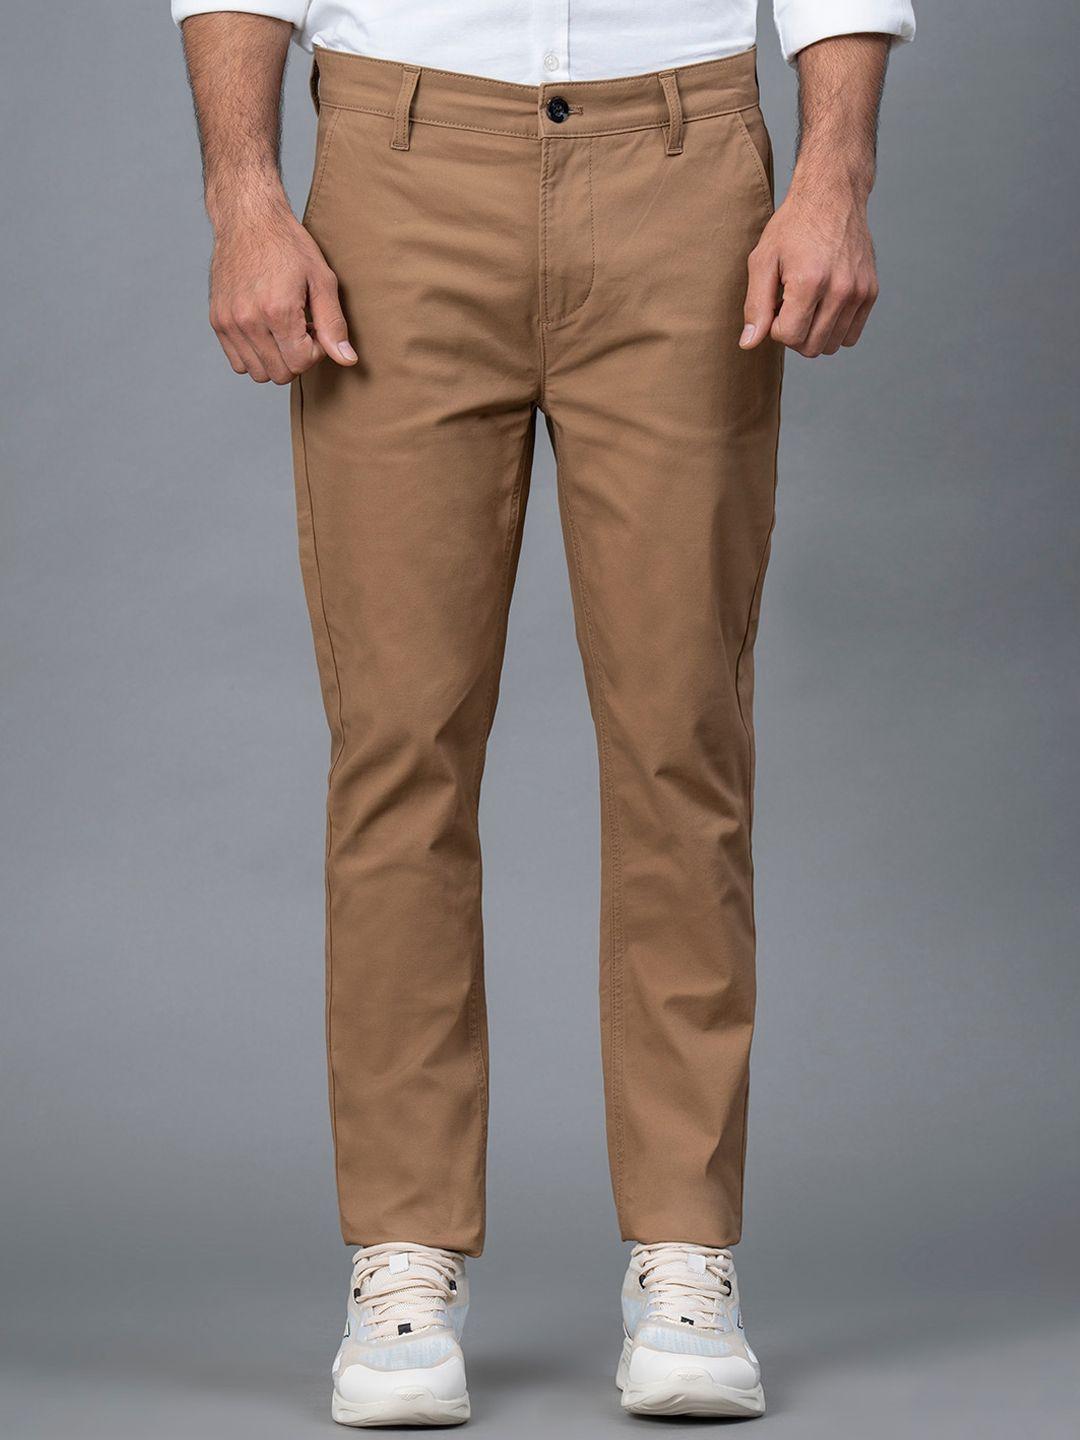 red tape men tan skinny fit chinos trousers